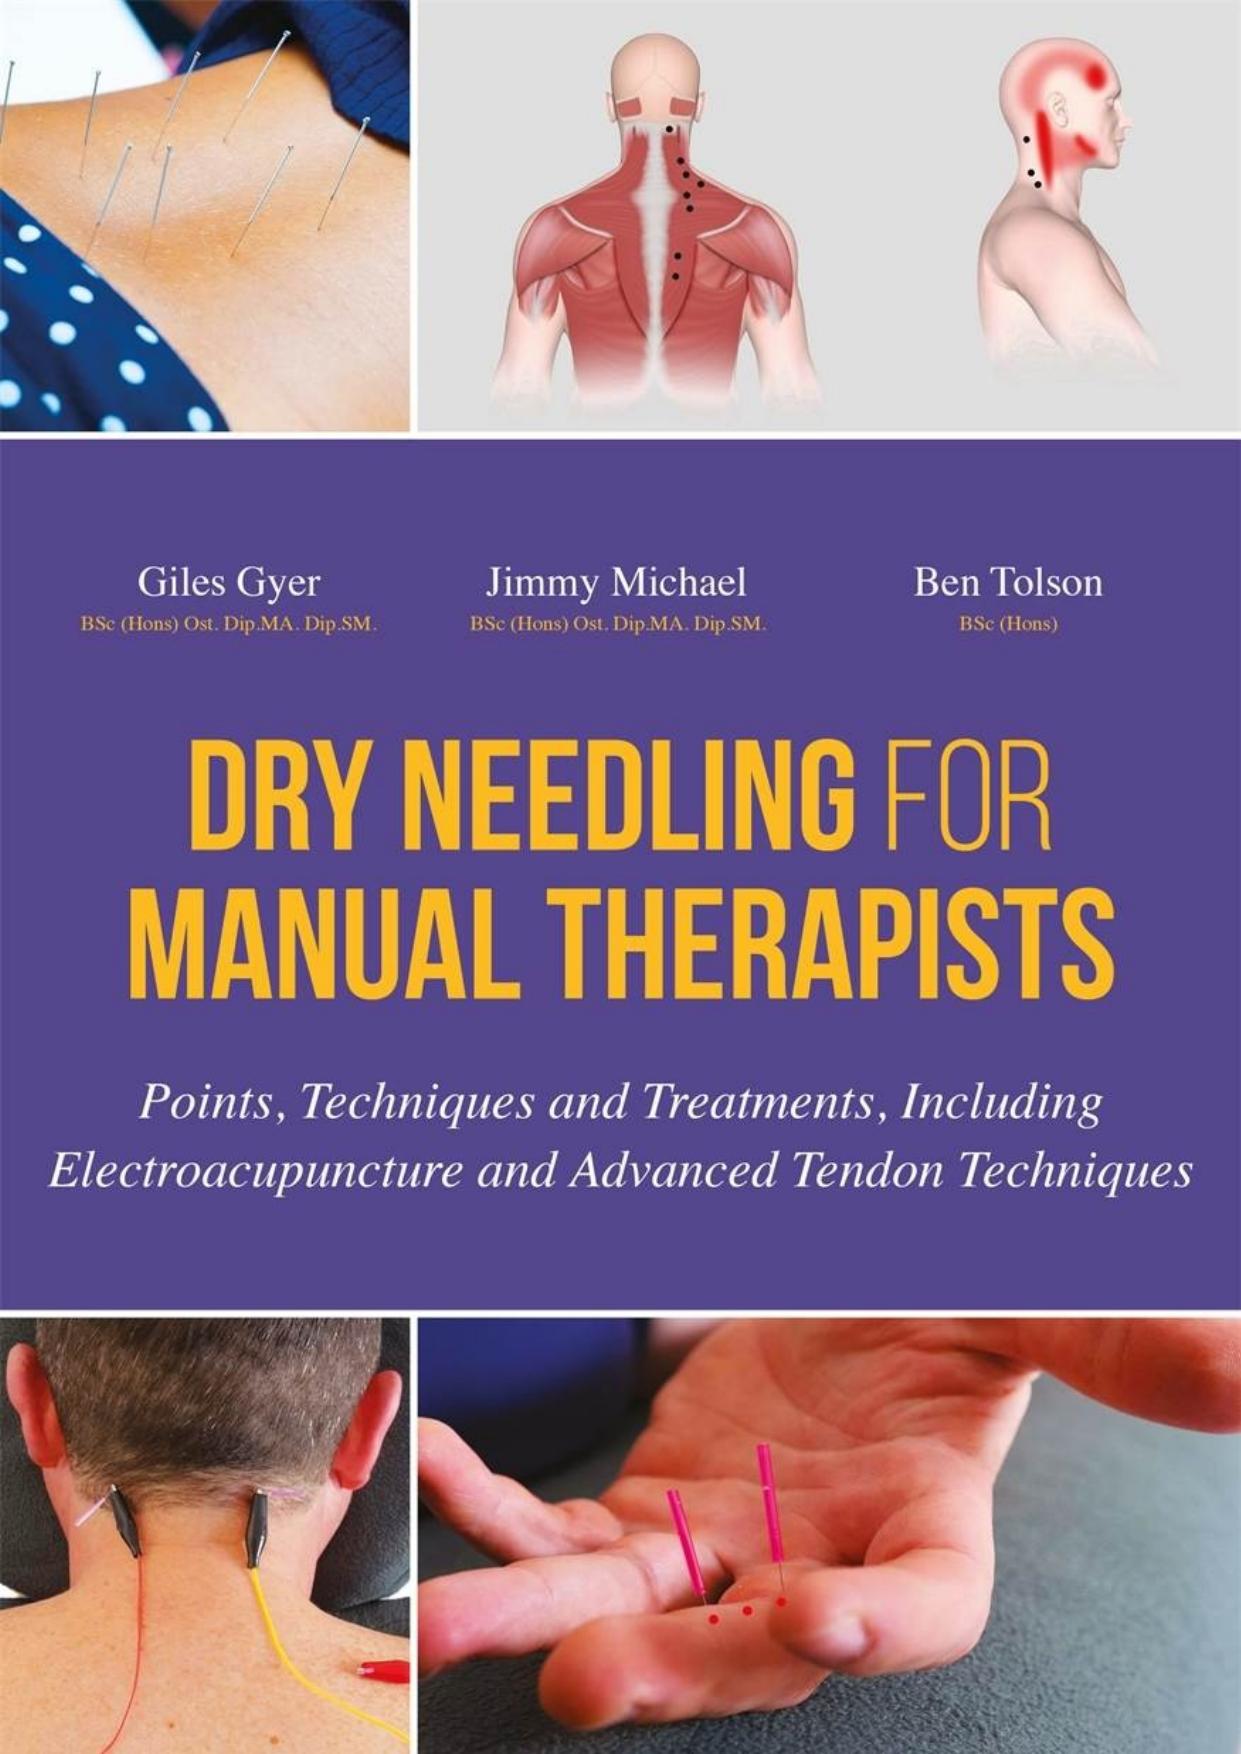 Dry Needling for Manual Therapists: Points, Techniques and Treatments, Including Electroacupuncture and Advanced Tendon Techniques by Giles Gyer & Jimmy Michael & Ben Tolson